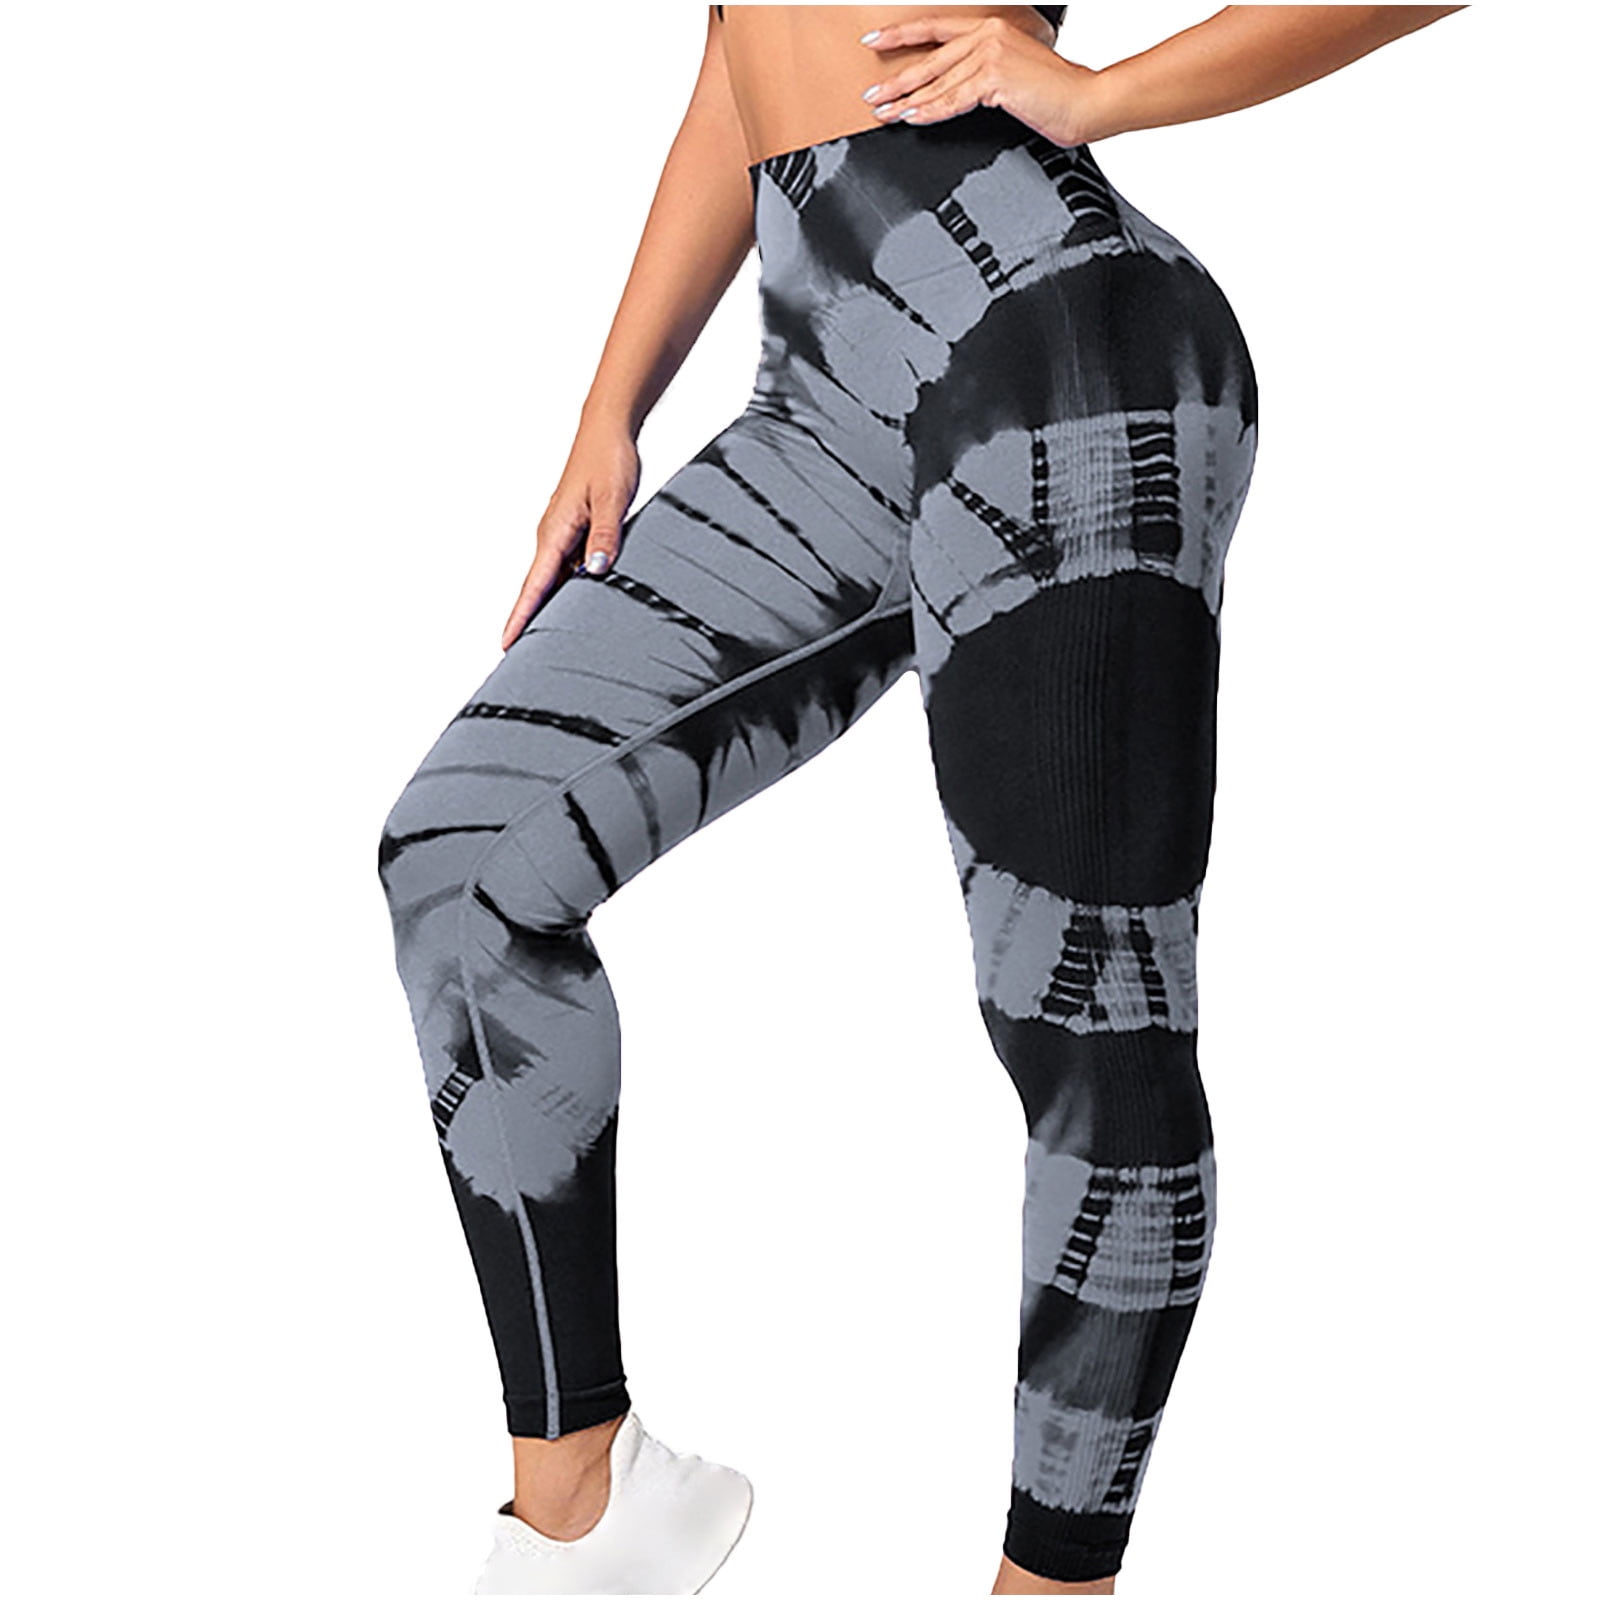 Women's Leggings Bubble Butt Pants Quick Dry High Waist Lifting Effect Yoga Gym  Workout Pilates Tie Dye Stretchy Sports Activewear